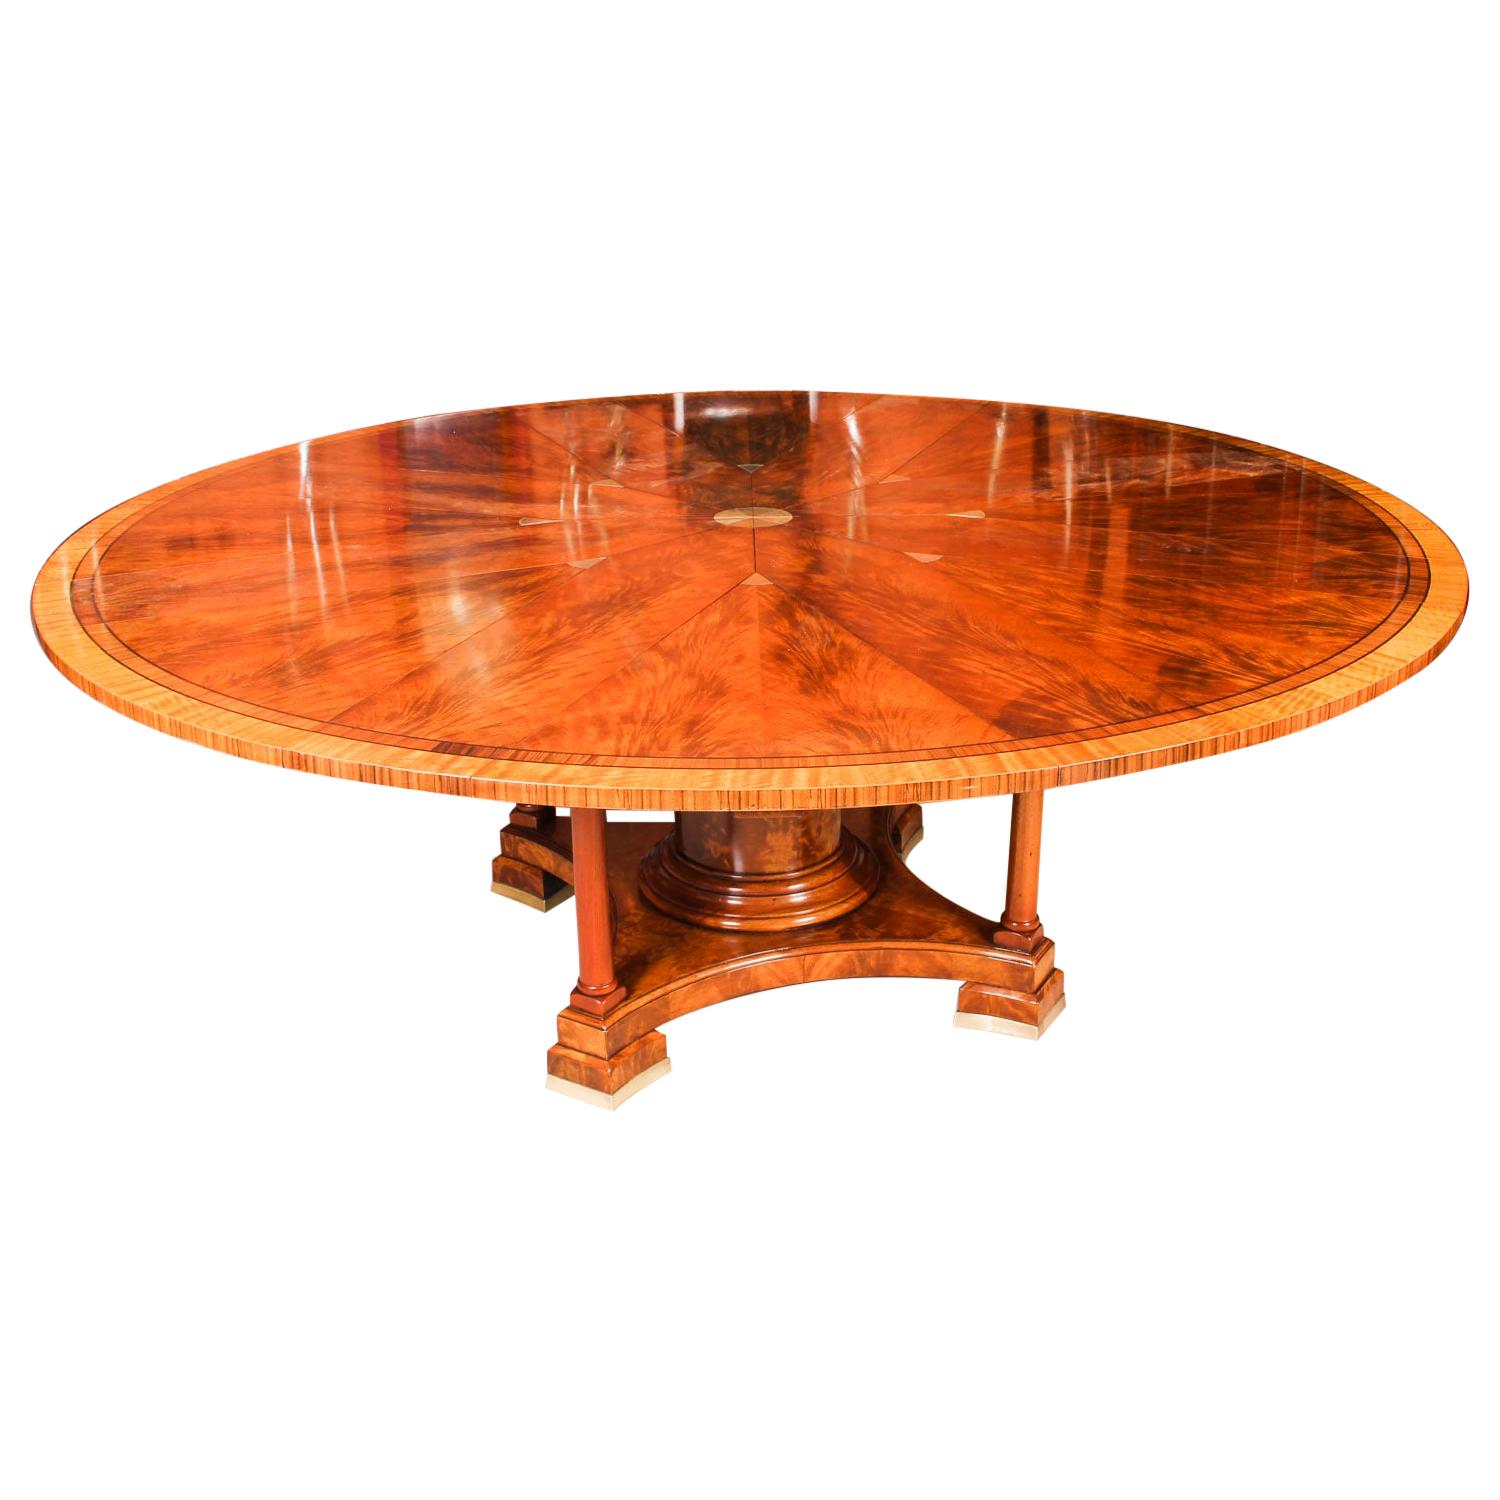 Antique Flame Mahogany Jupe Dining Table, Early 20th Century